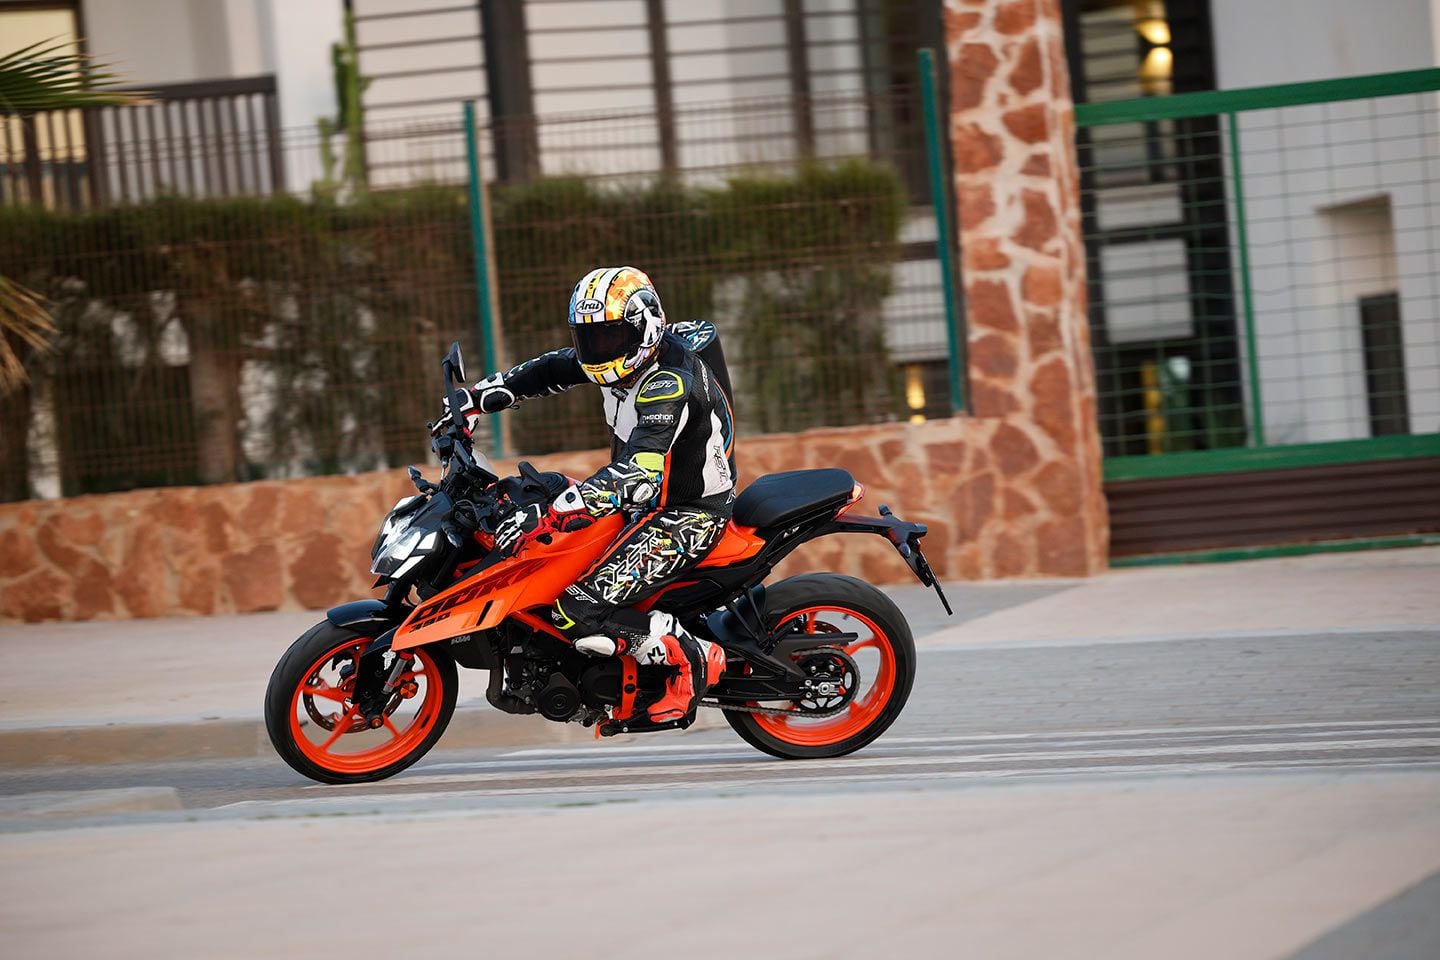 Around town and commuting, the 390 Duke is capable and fuel efficient. (Full leathers not required in town…)